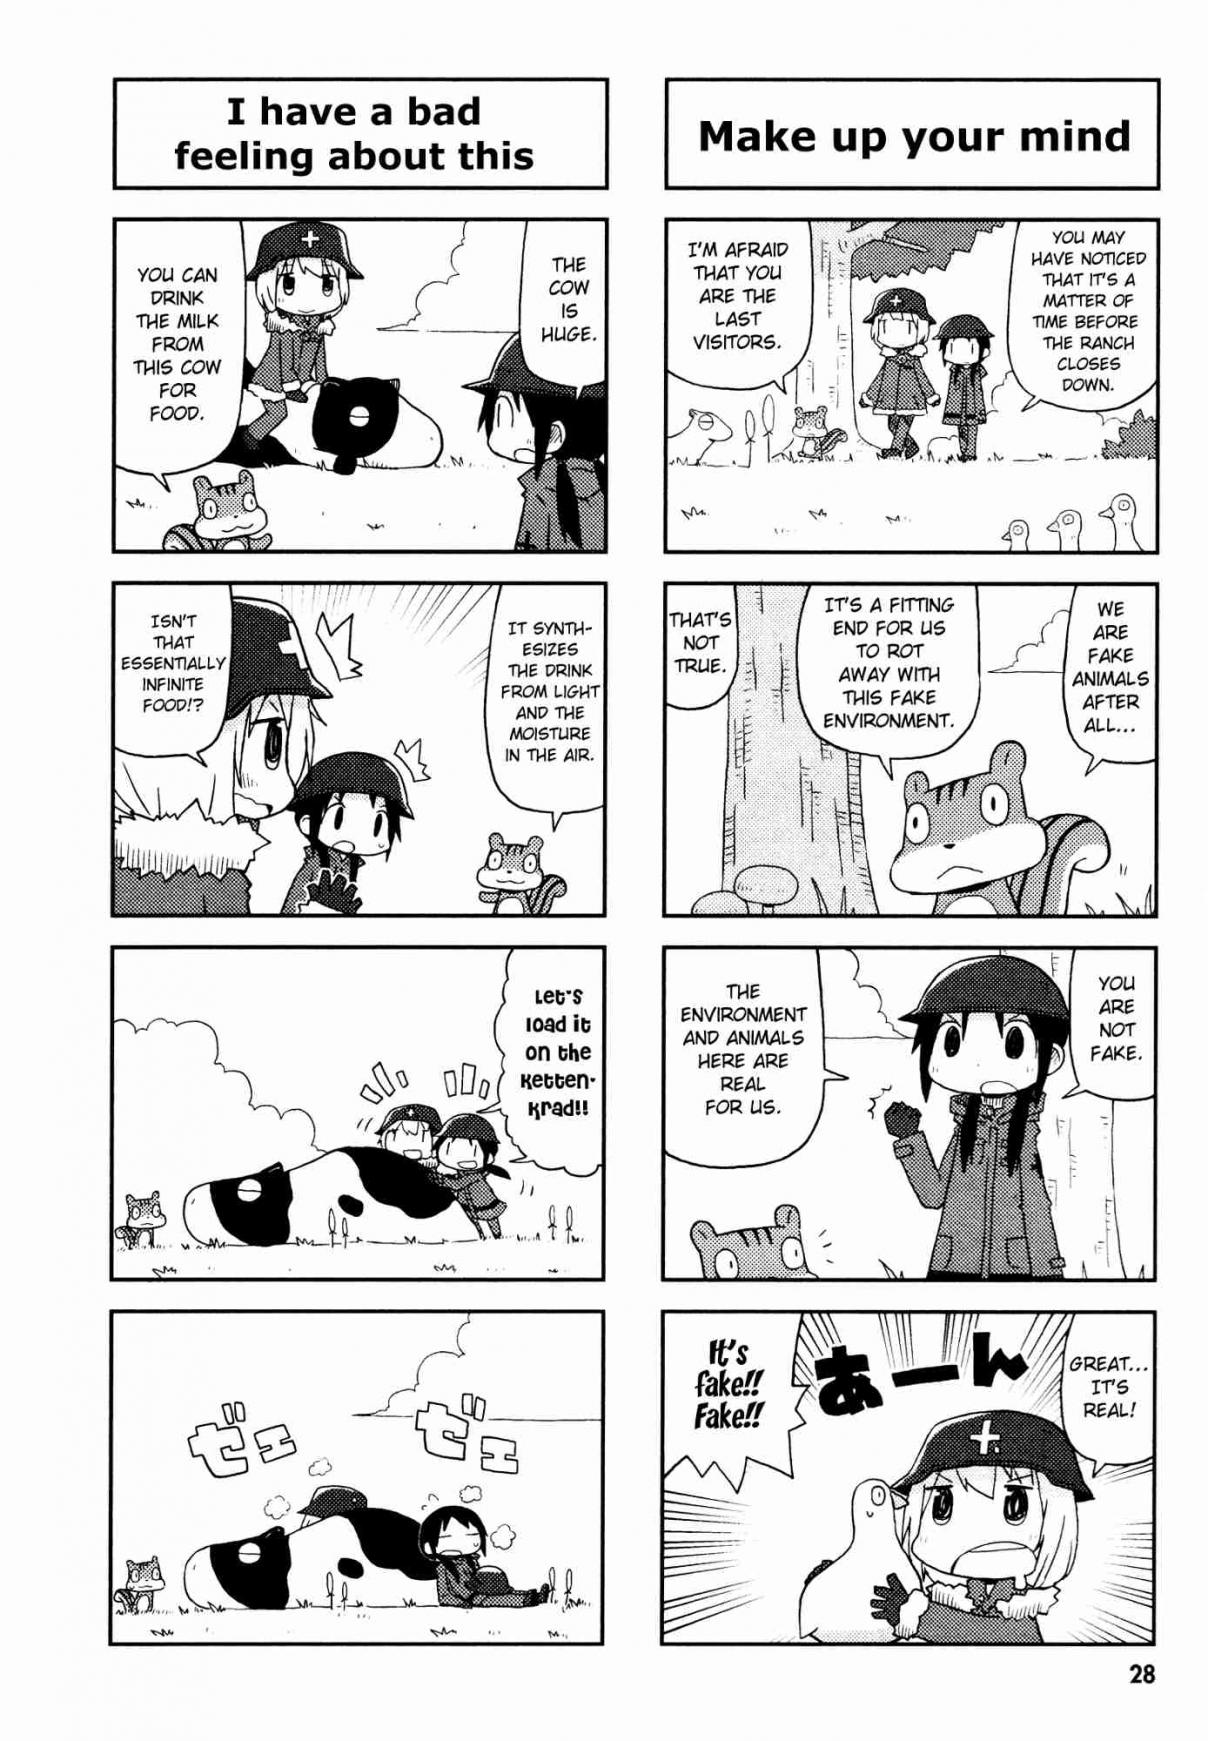 Girls' Last Tour Official Anthology Comic Ch. 3 At the Ranch Nannyaka